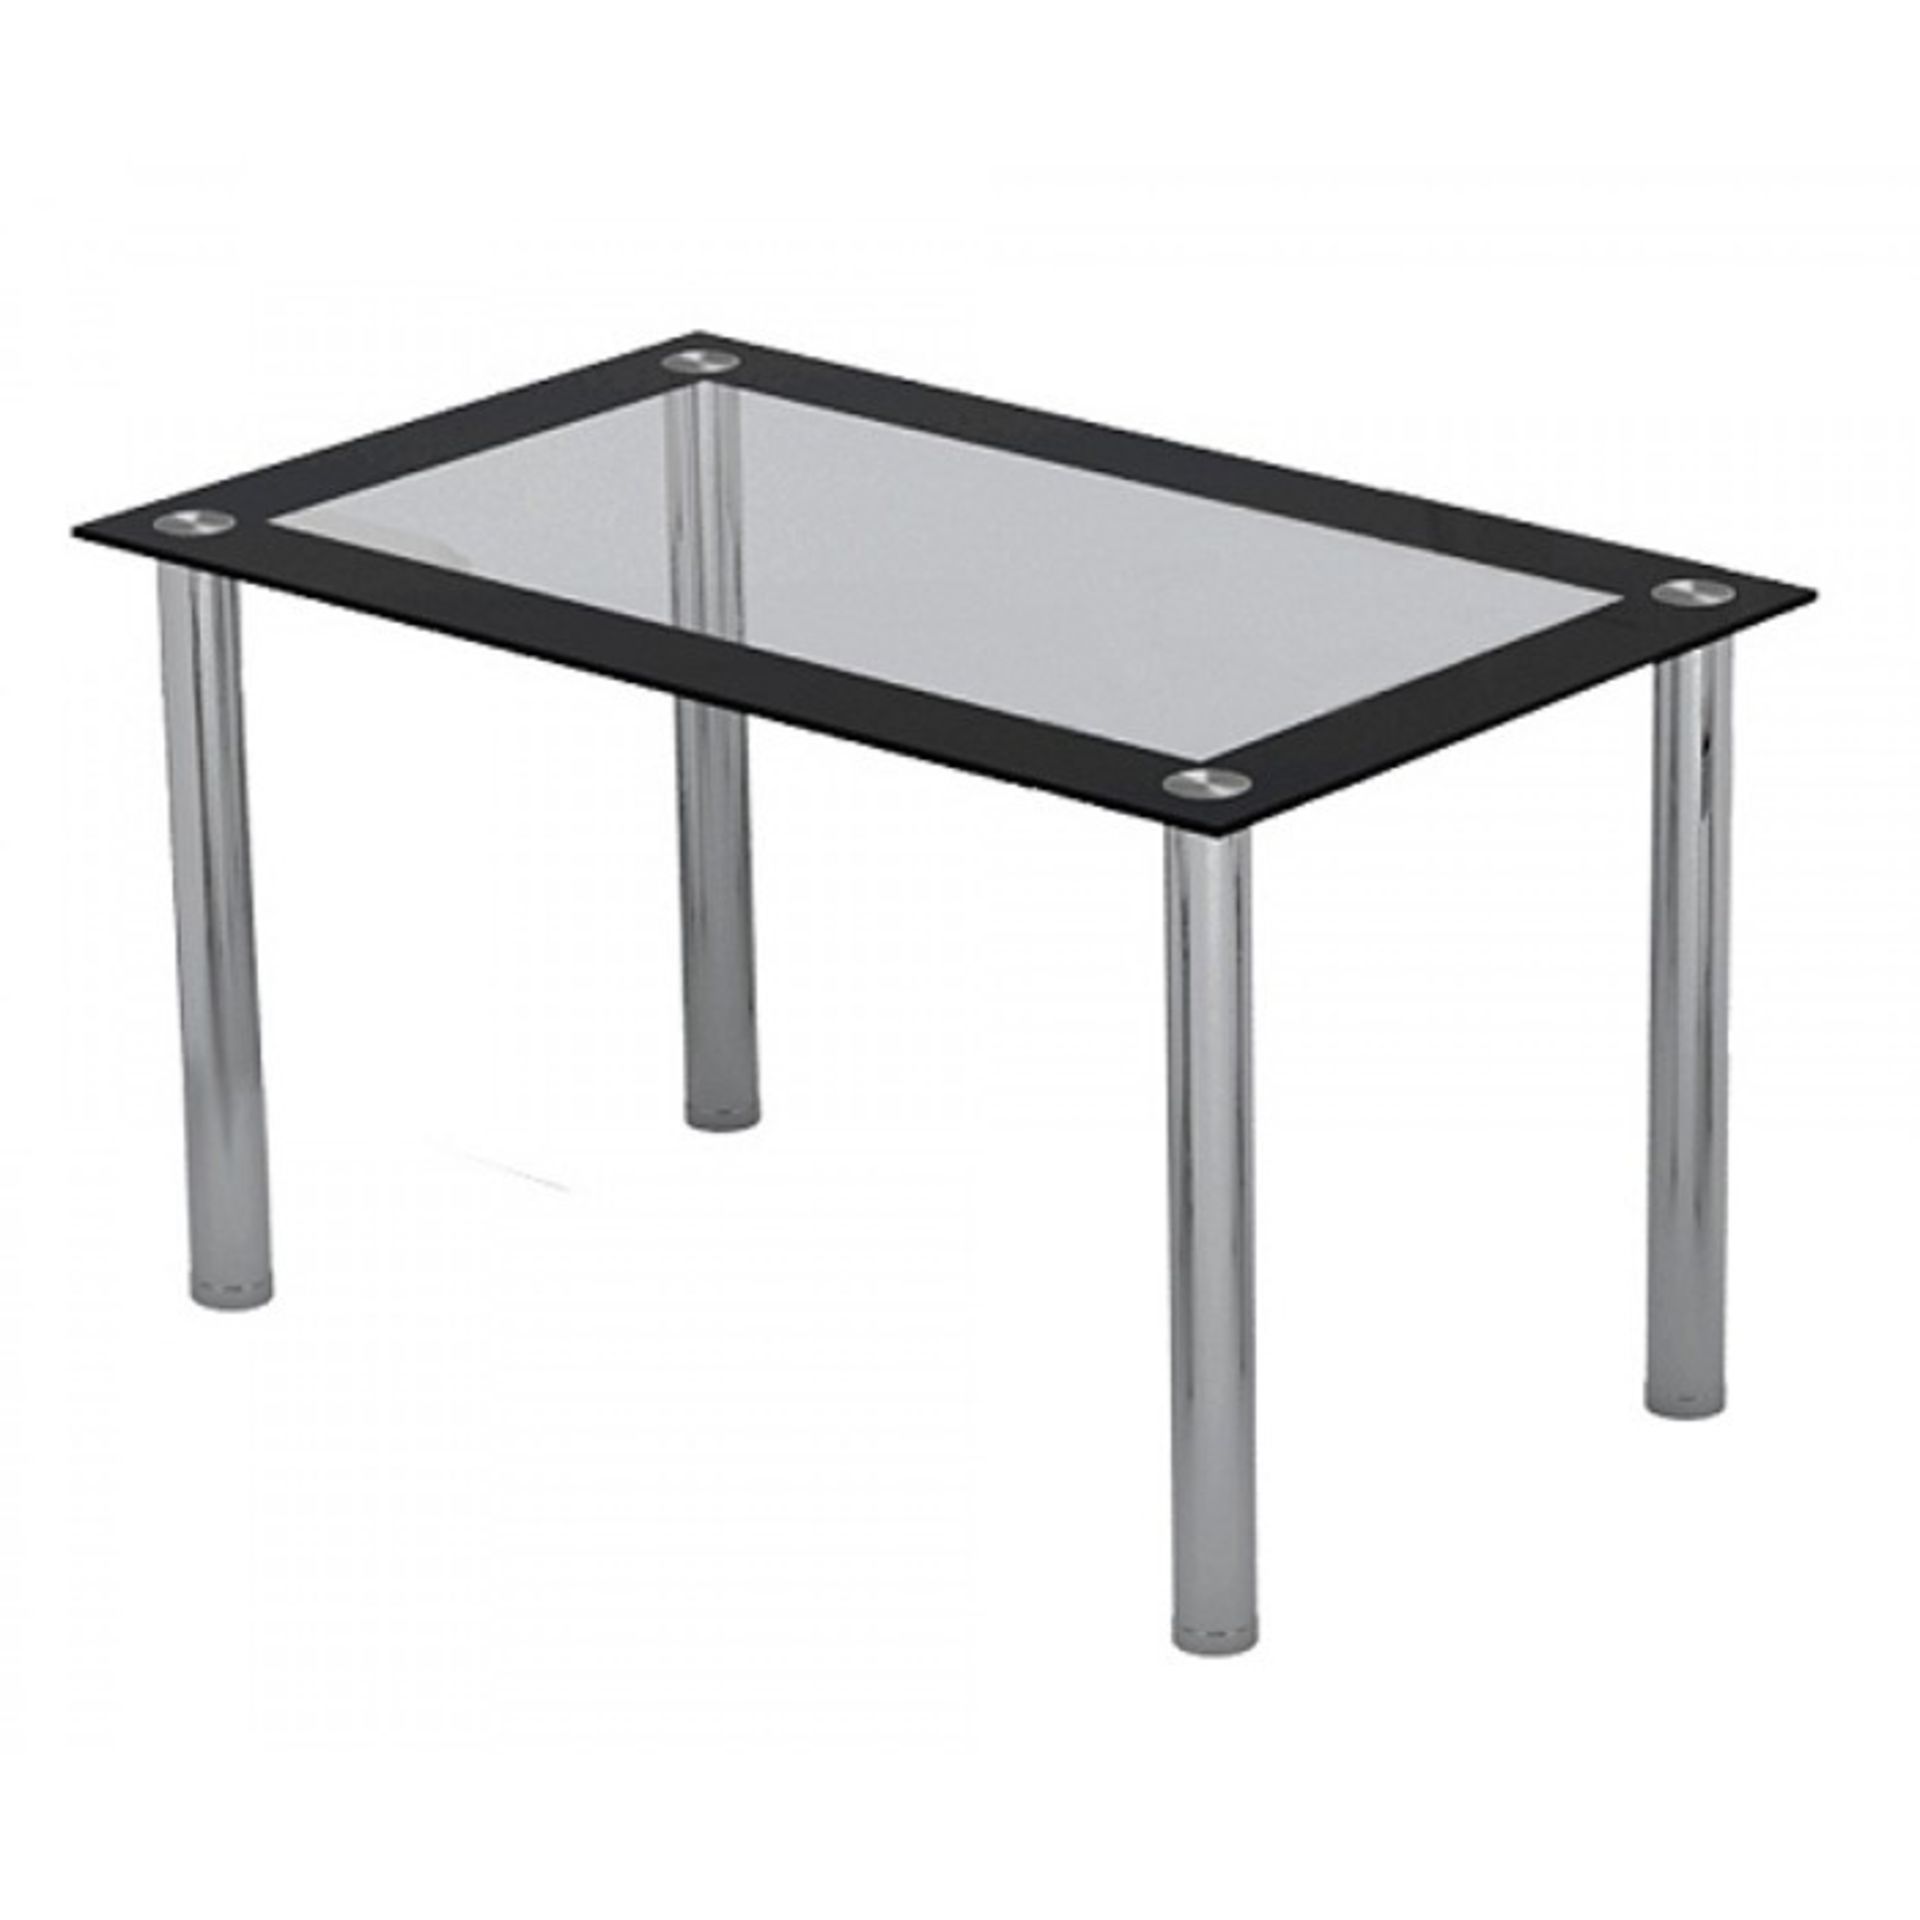 1 BRAND NEW BOXED 4 SEATER DINING TABLE WITH CLEAR GLASS AND BLACK TRIM DTBL013BLK, PLEASE NOTE THIS